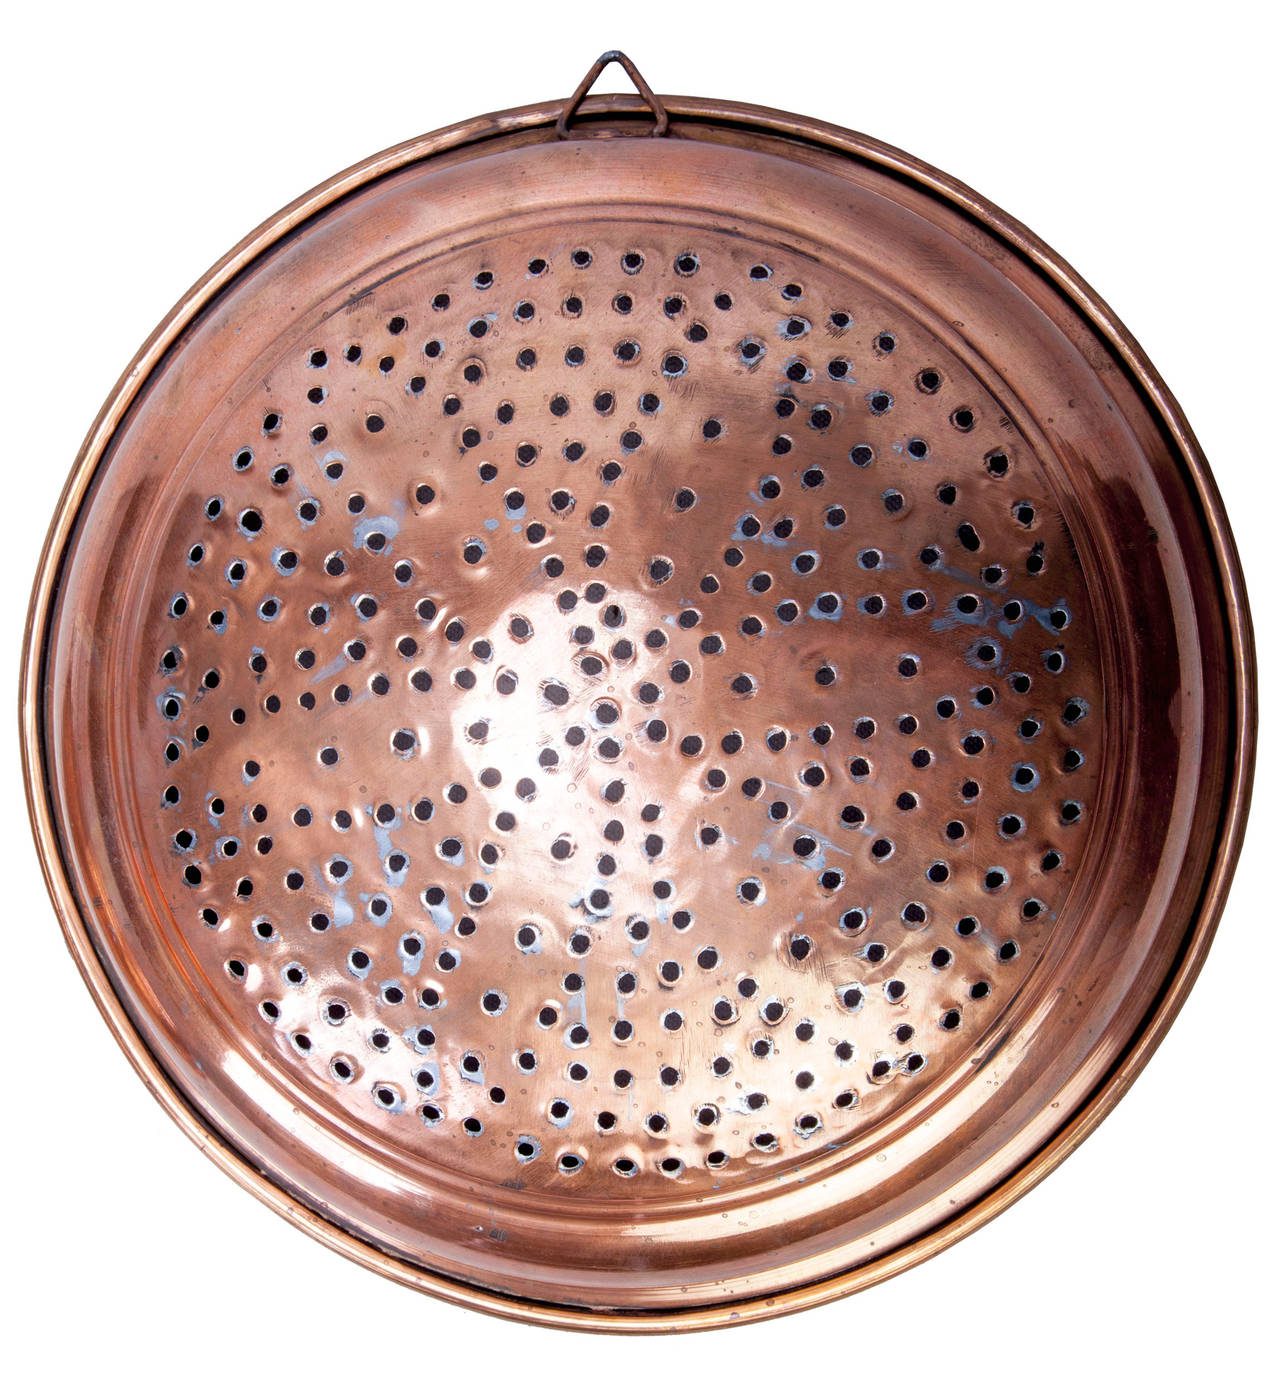 Two copper strainers, large is 12 inch diameter, tin lined with a triangular hanging loop and the holes are arranged in a petaled flower pattern.
Small is 9 inches in diameter, solid copper with no lining with circular hanging loop, with holes